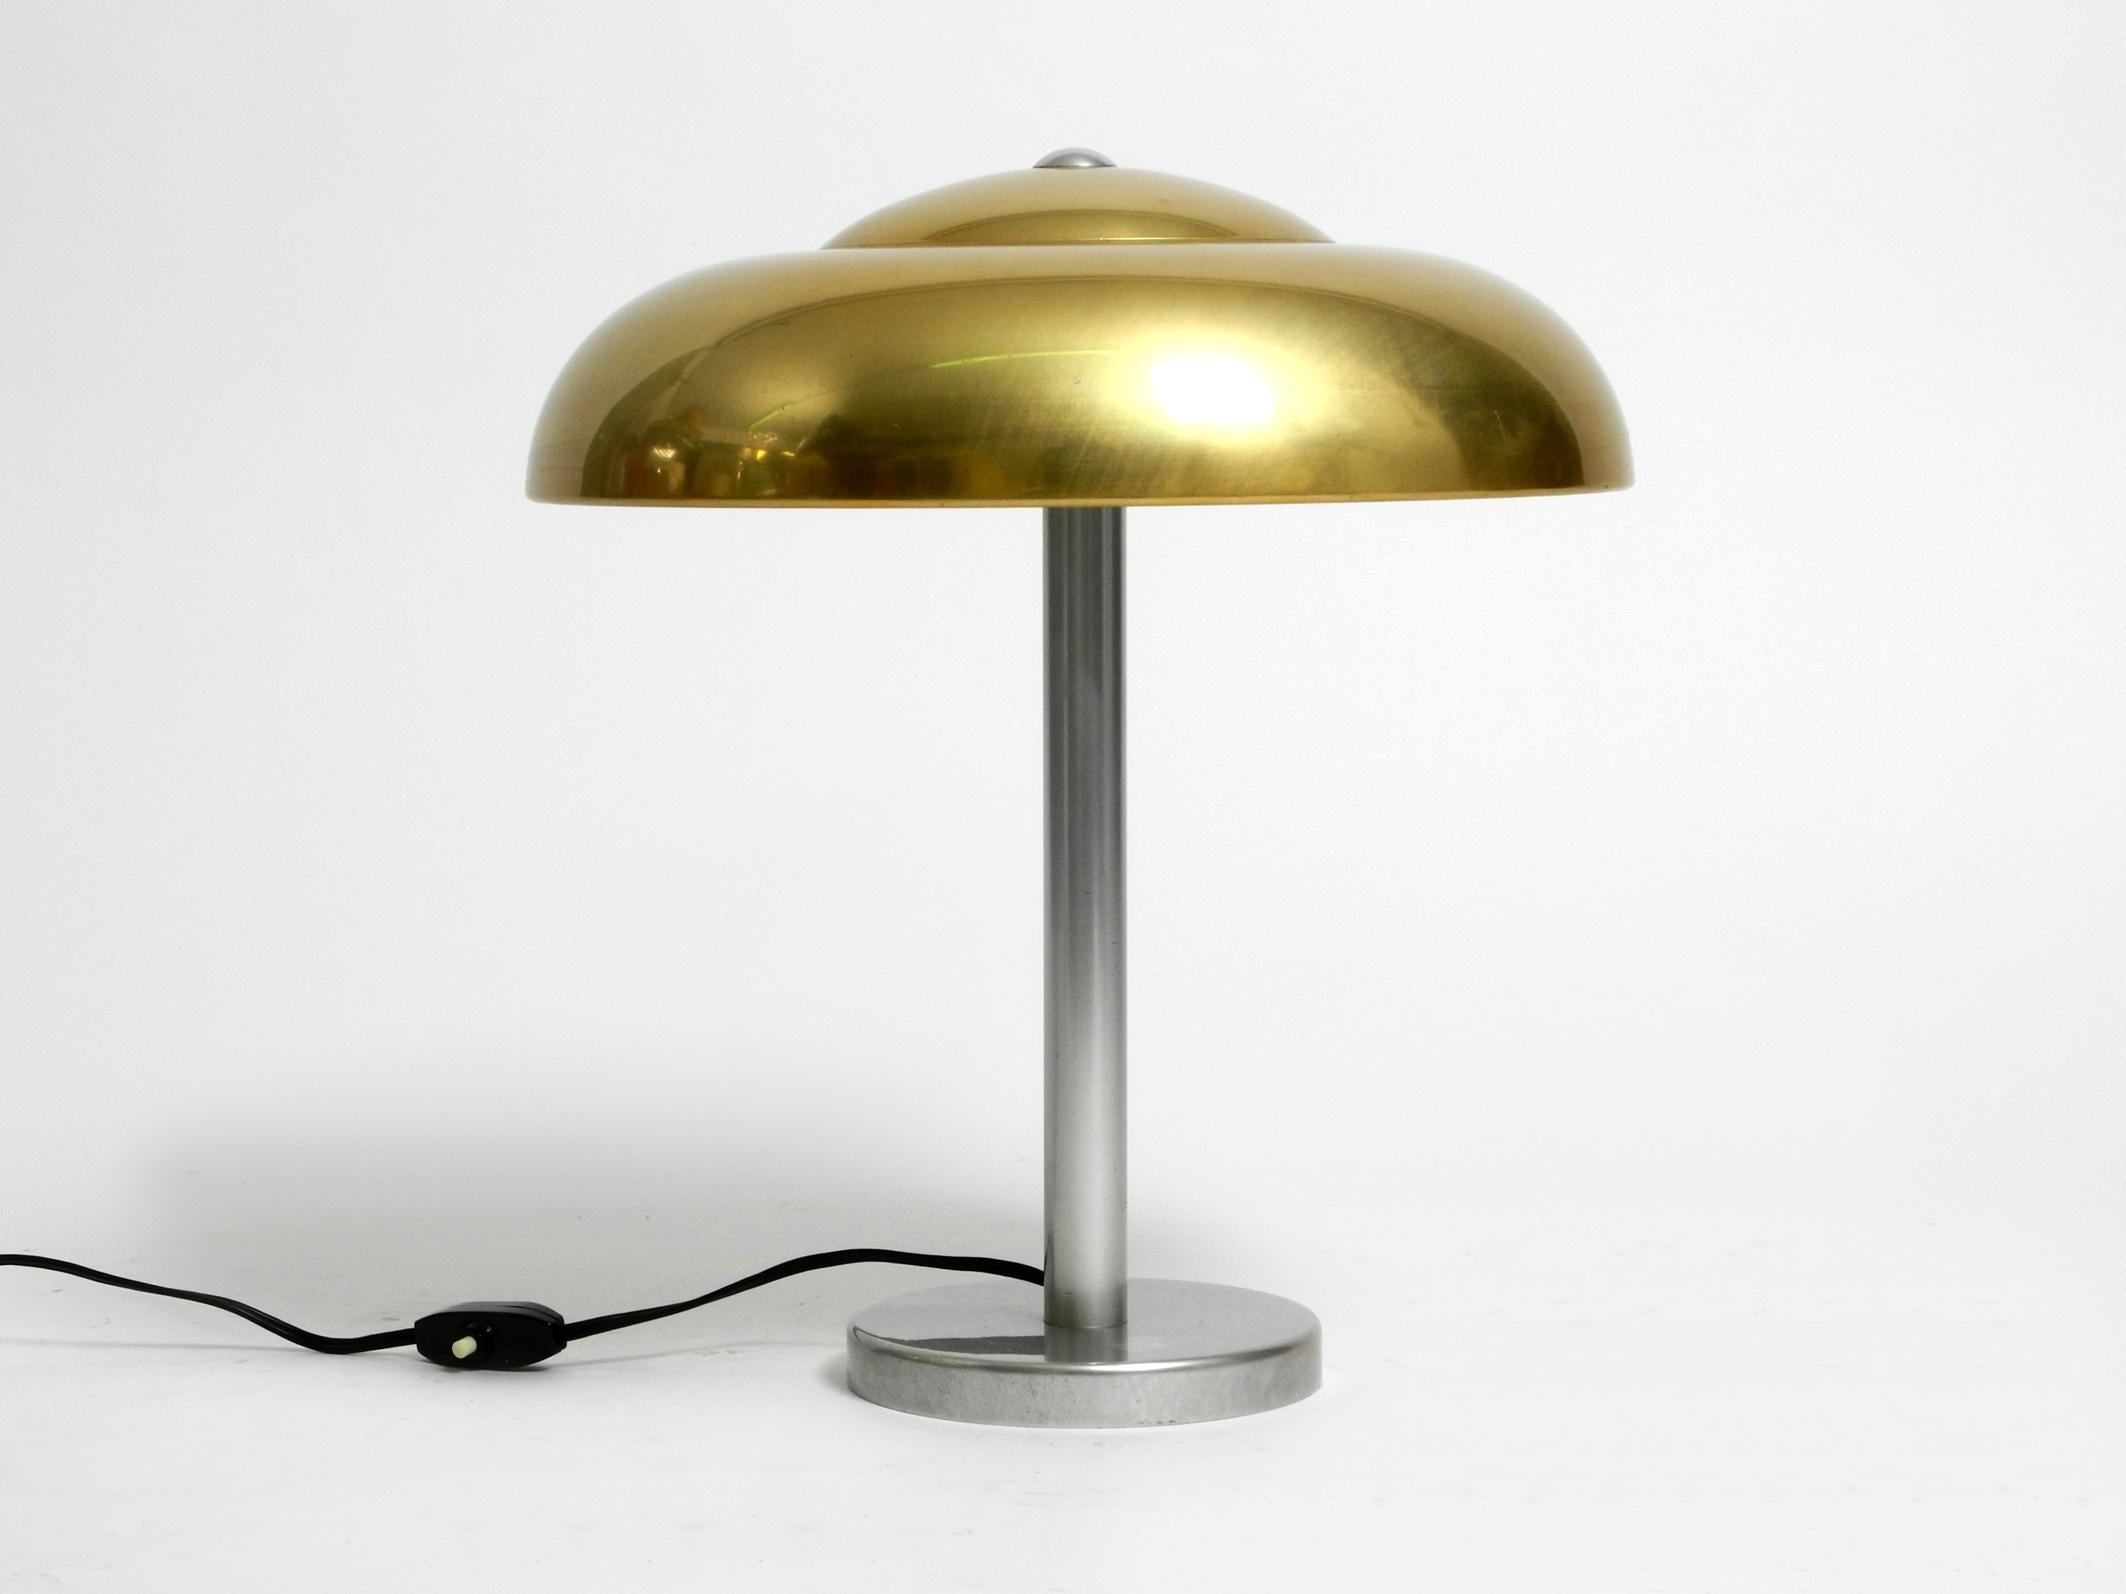 Beautiful extremely rare large WMF Ikora table lamp from the 1930s.
In a very good vintage condition. Minimalist and very beautiful German design.
The shade is made of aluminum and is anodized in a color like brass on the outside.
With polished